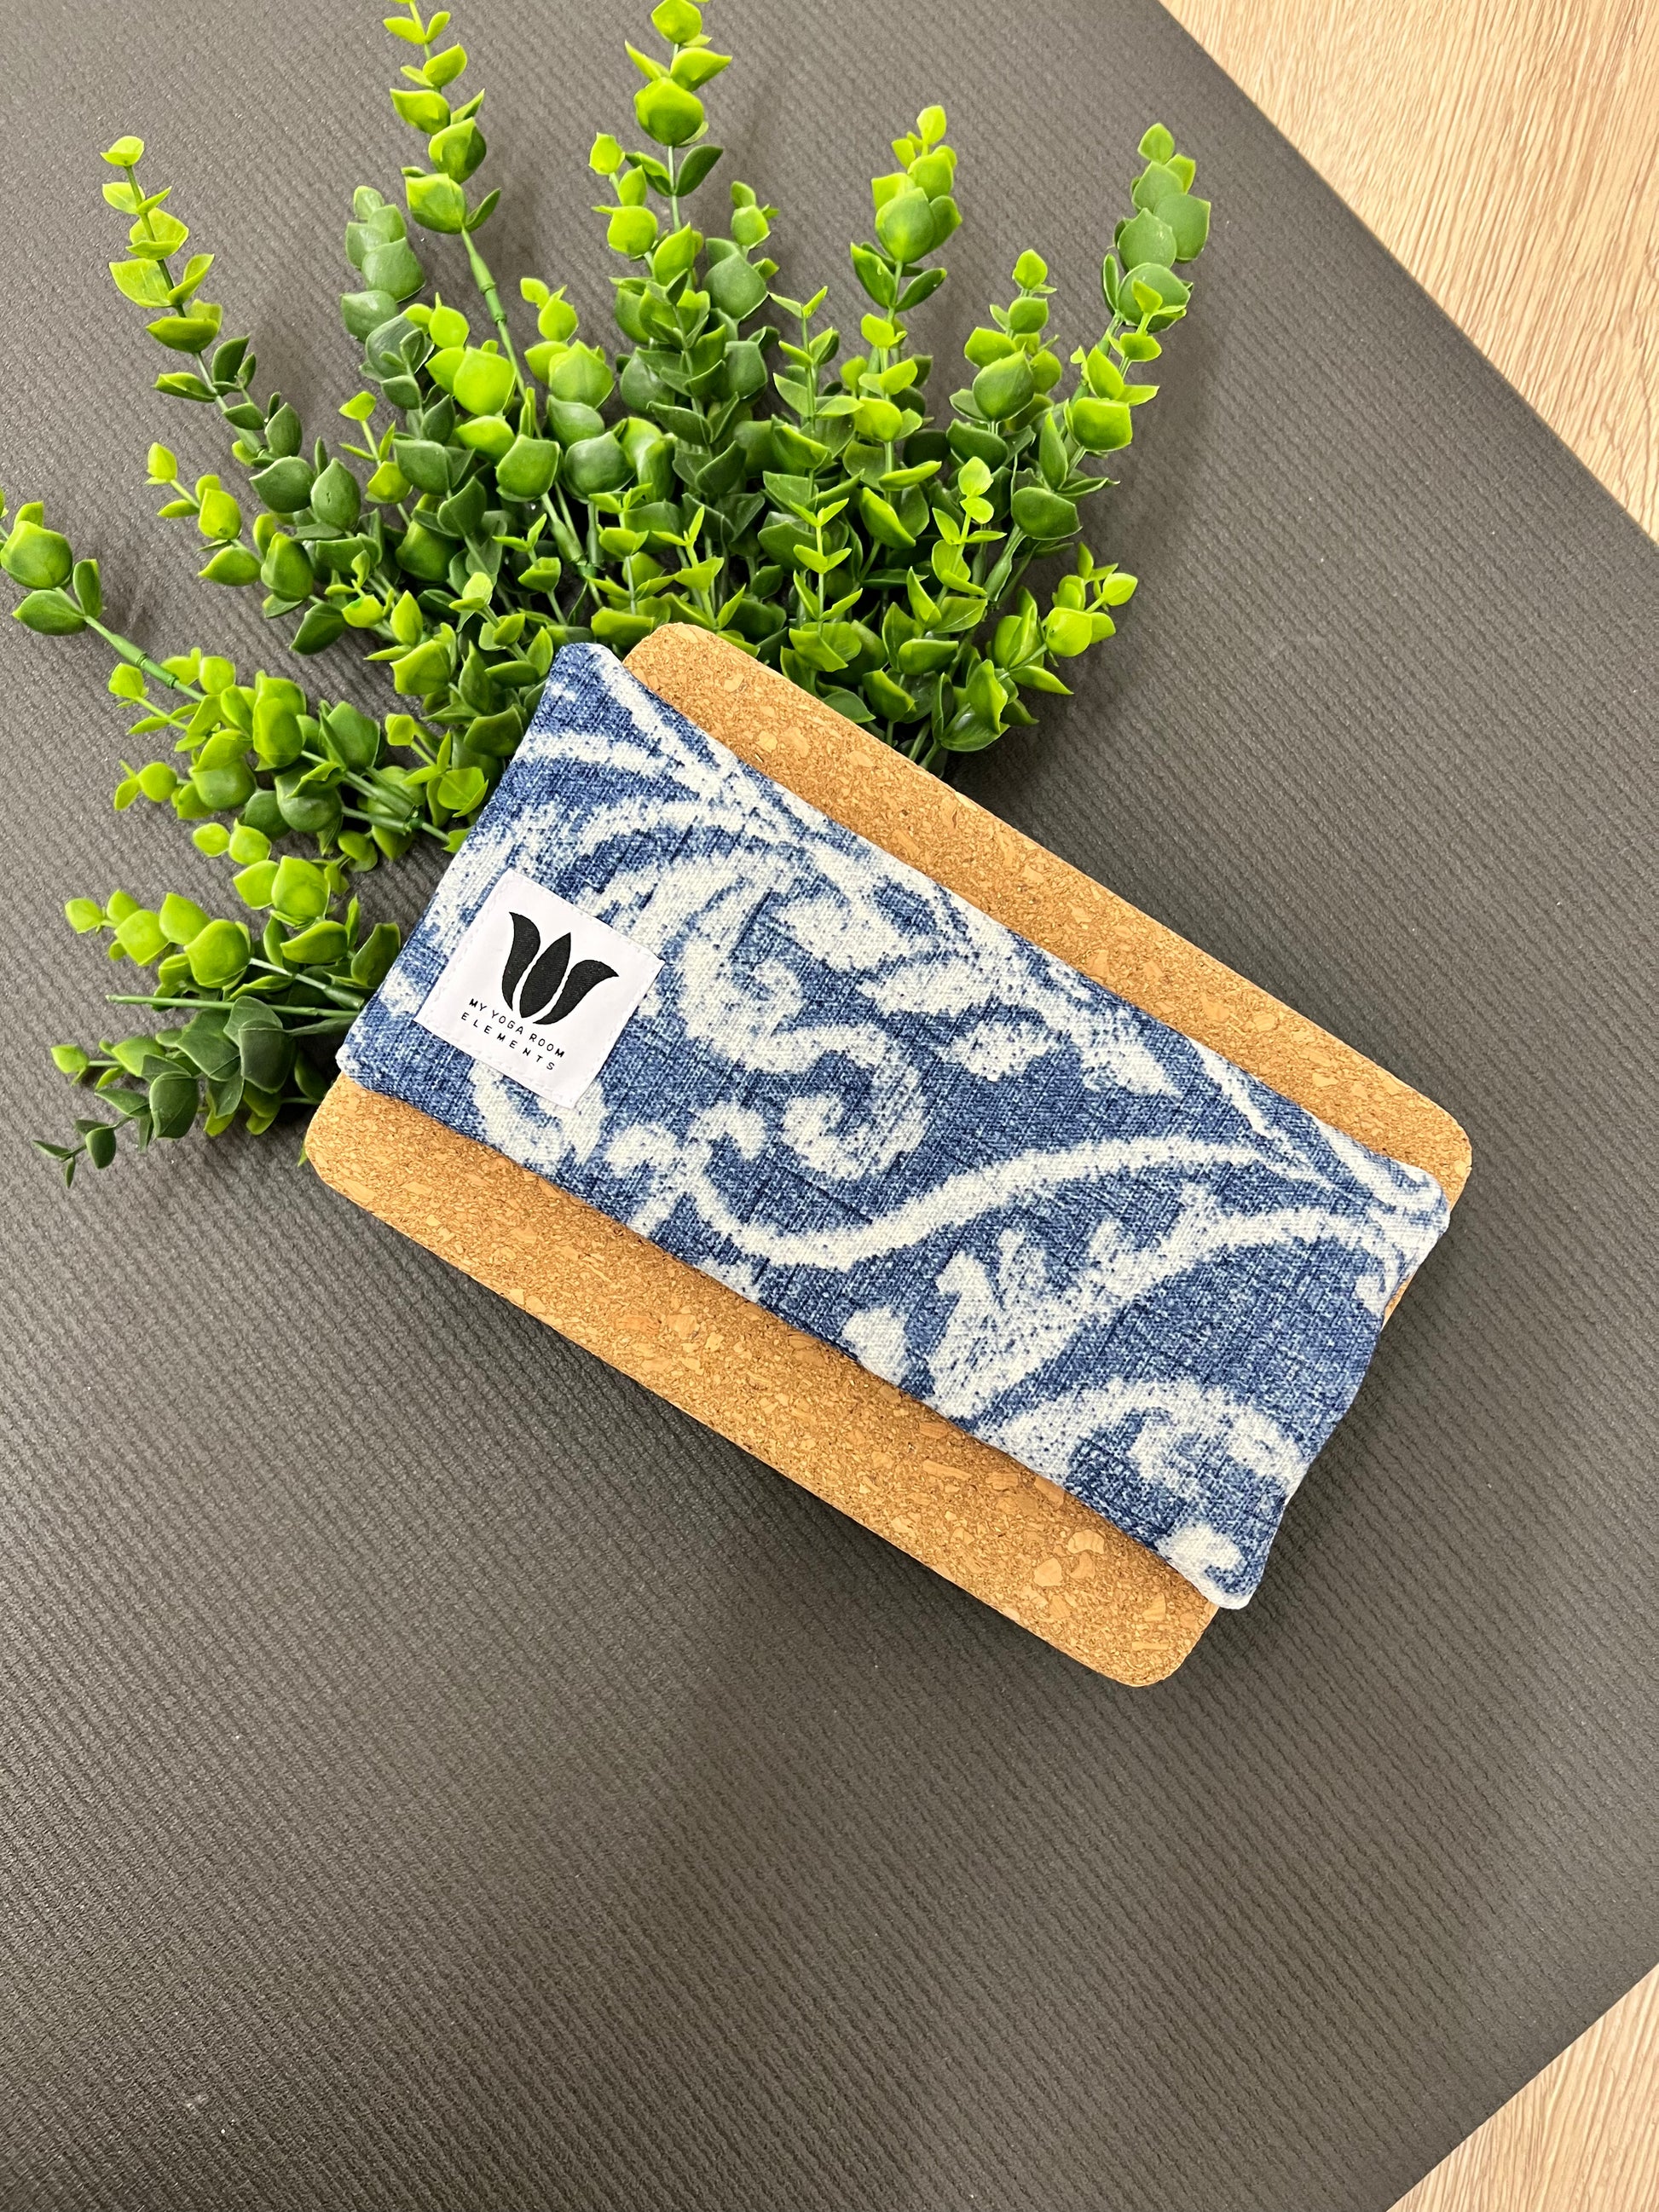 Luxury Eye Pillow in white and blue print fabric with satin backing for yoga and meditation. Made in Canada by My Yoga Room Elements